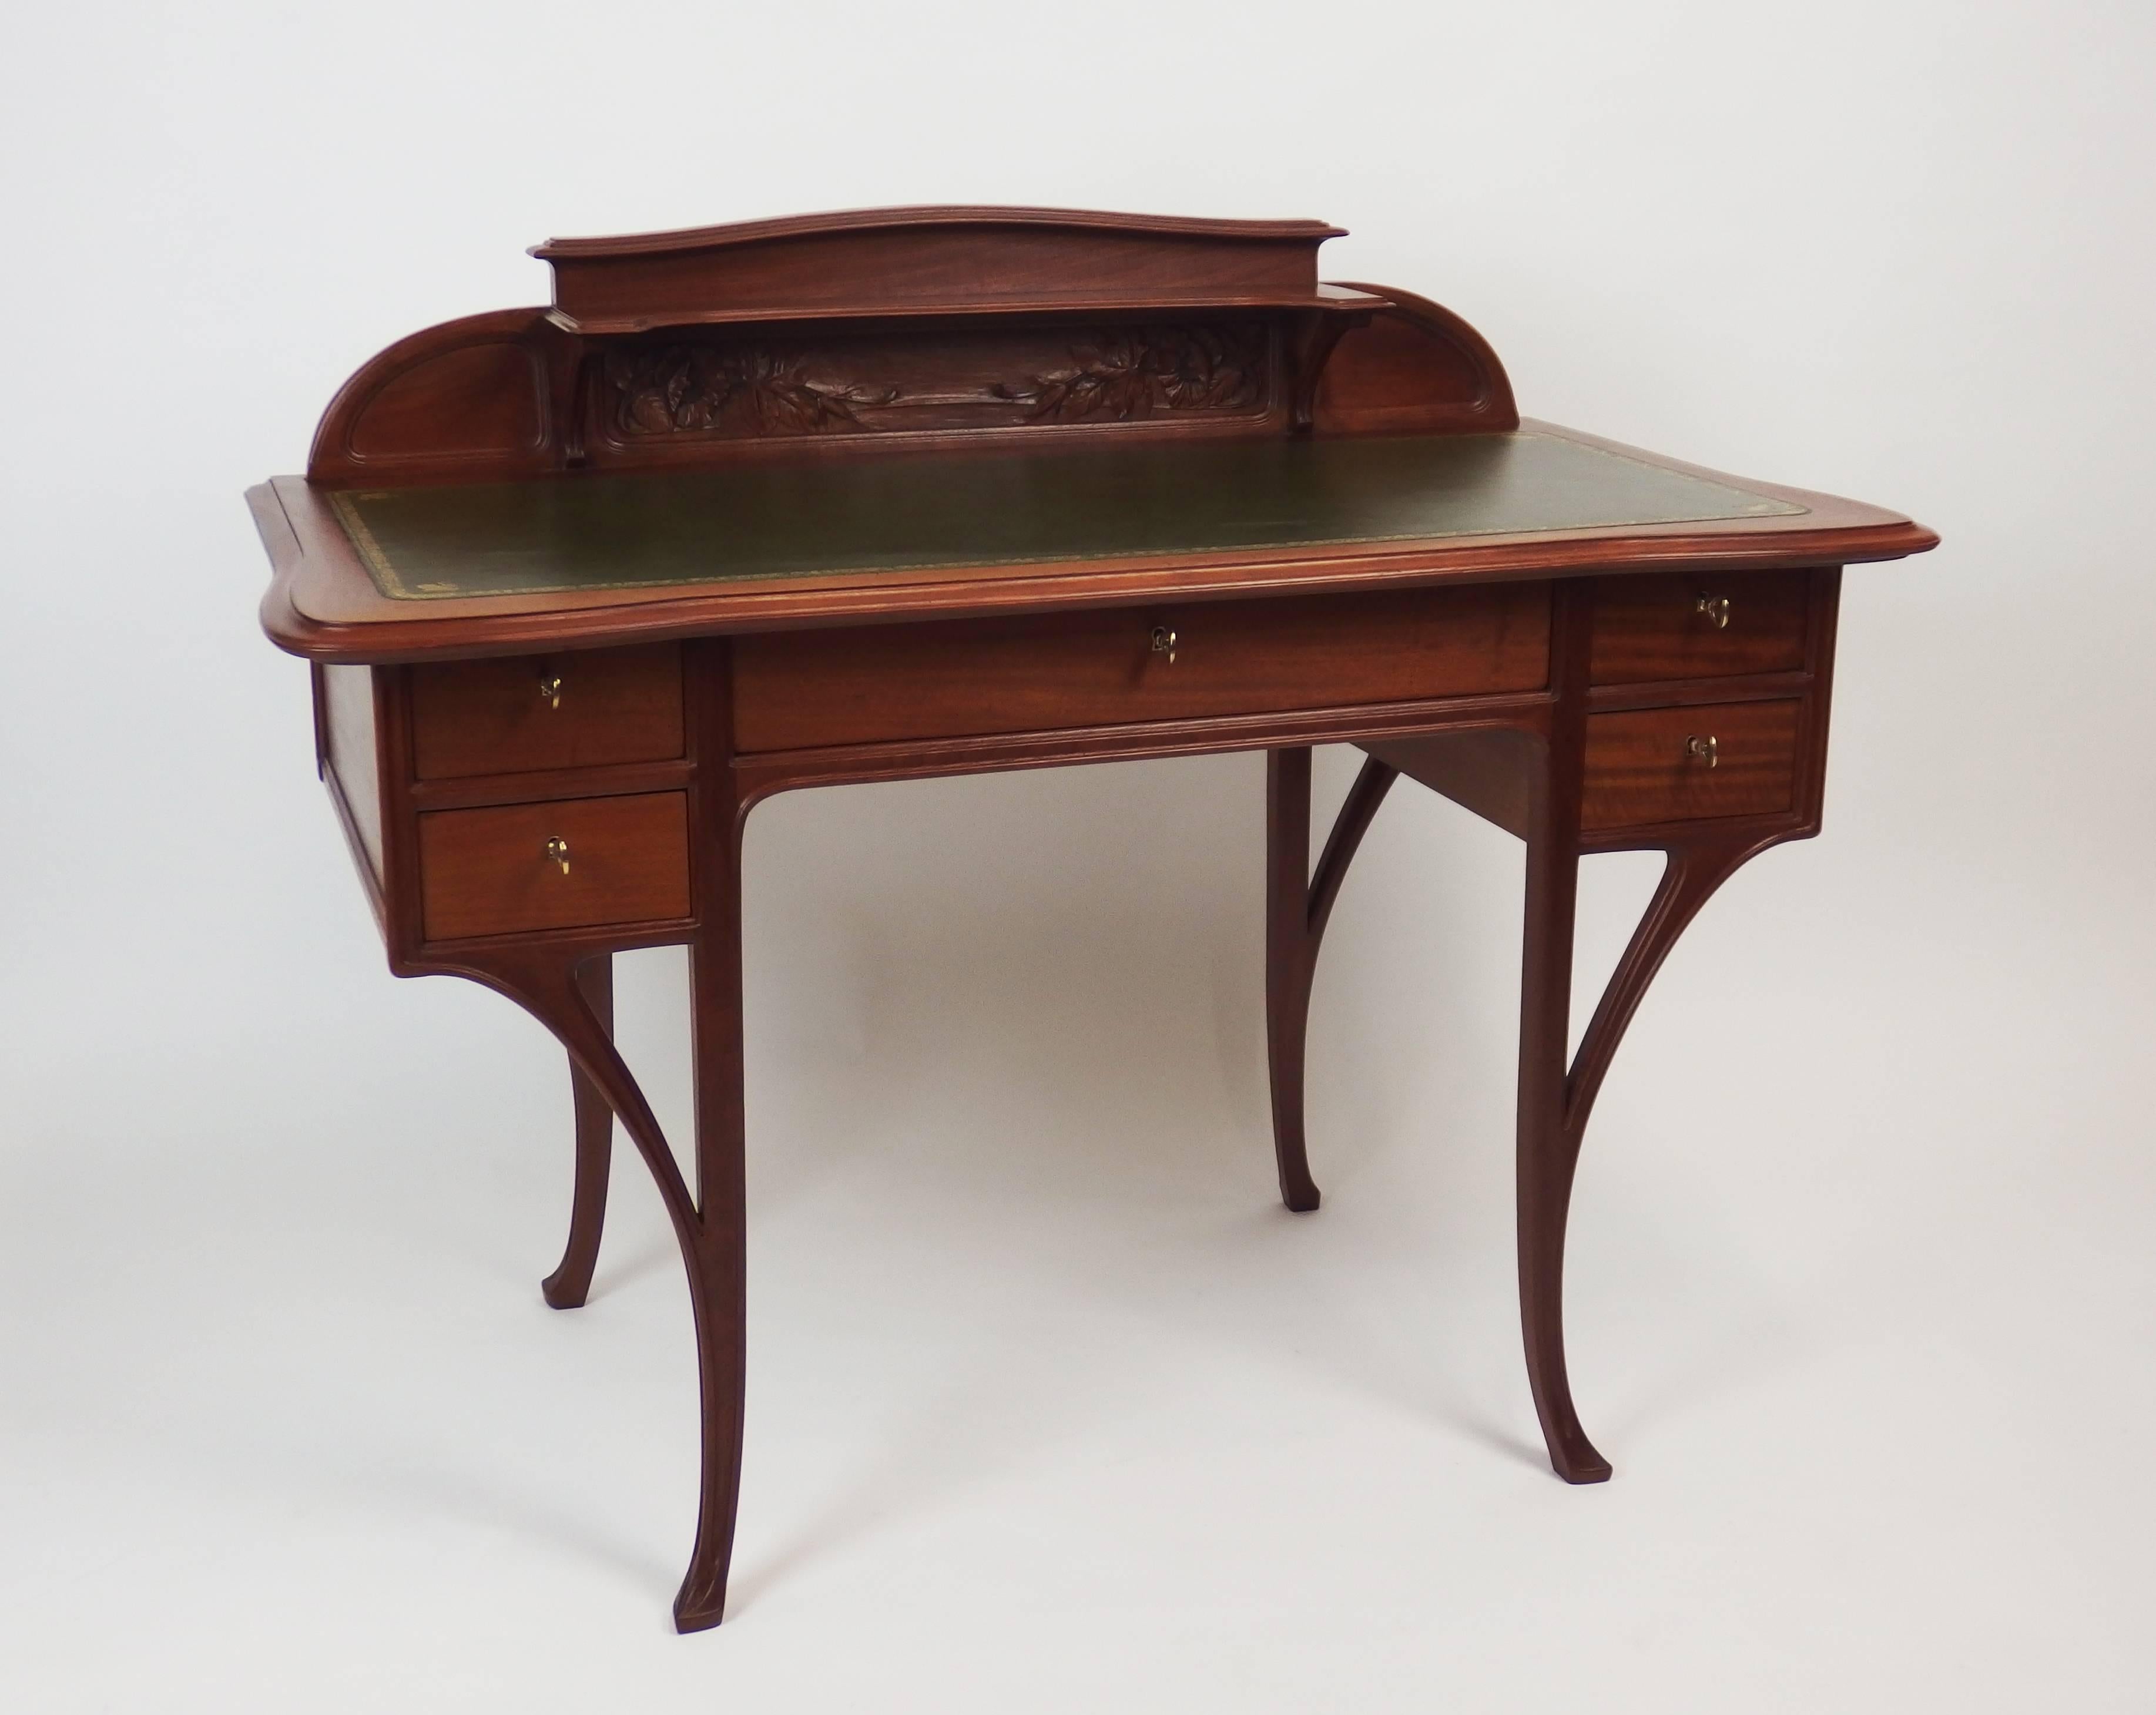 This functional and graceful desk belonging to the 